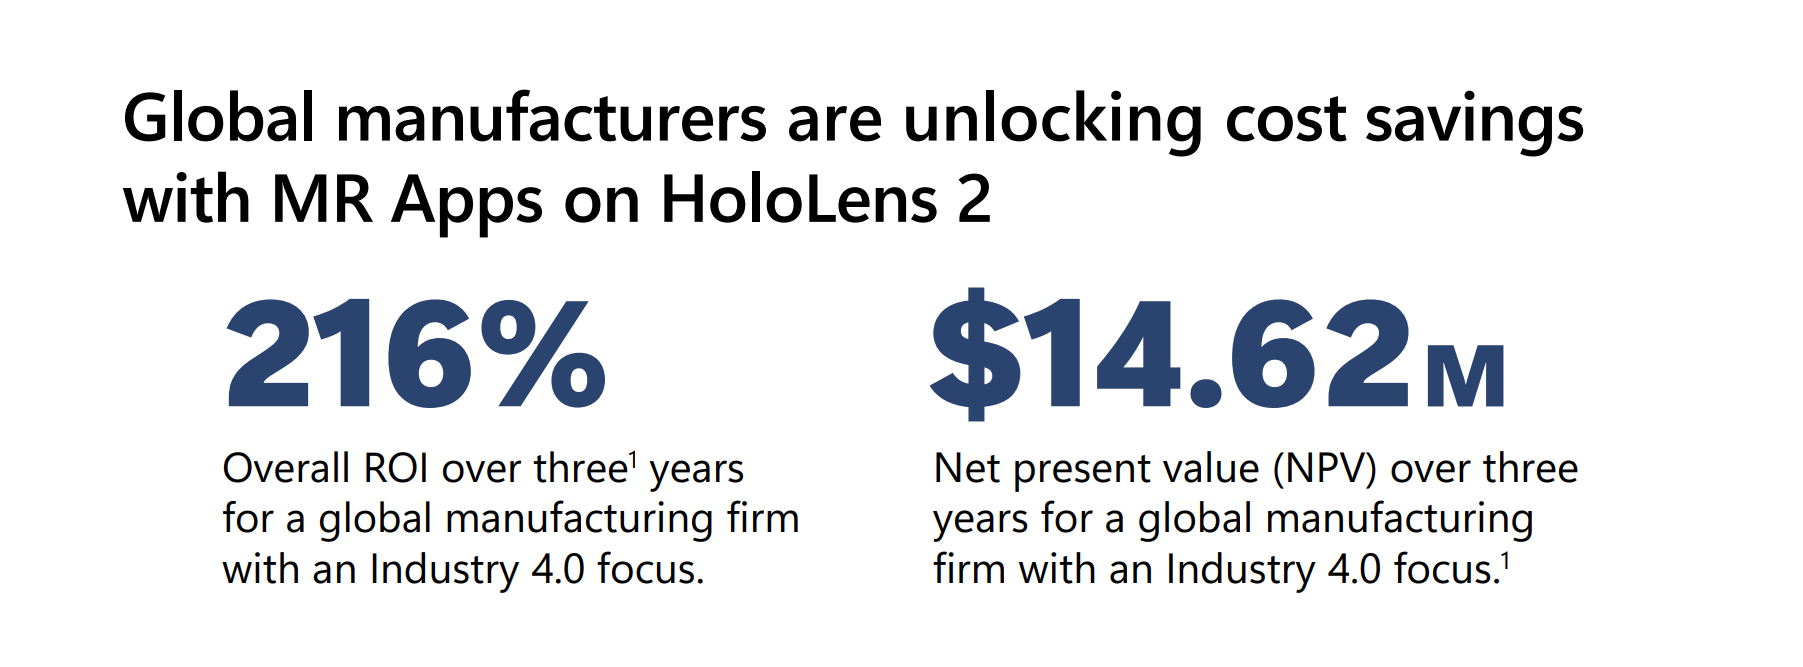 Image shows the ROI for the global manufacturing scenario.